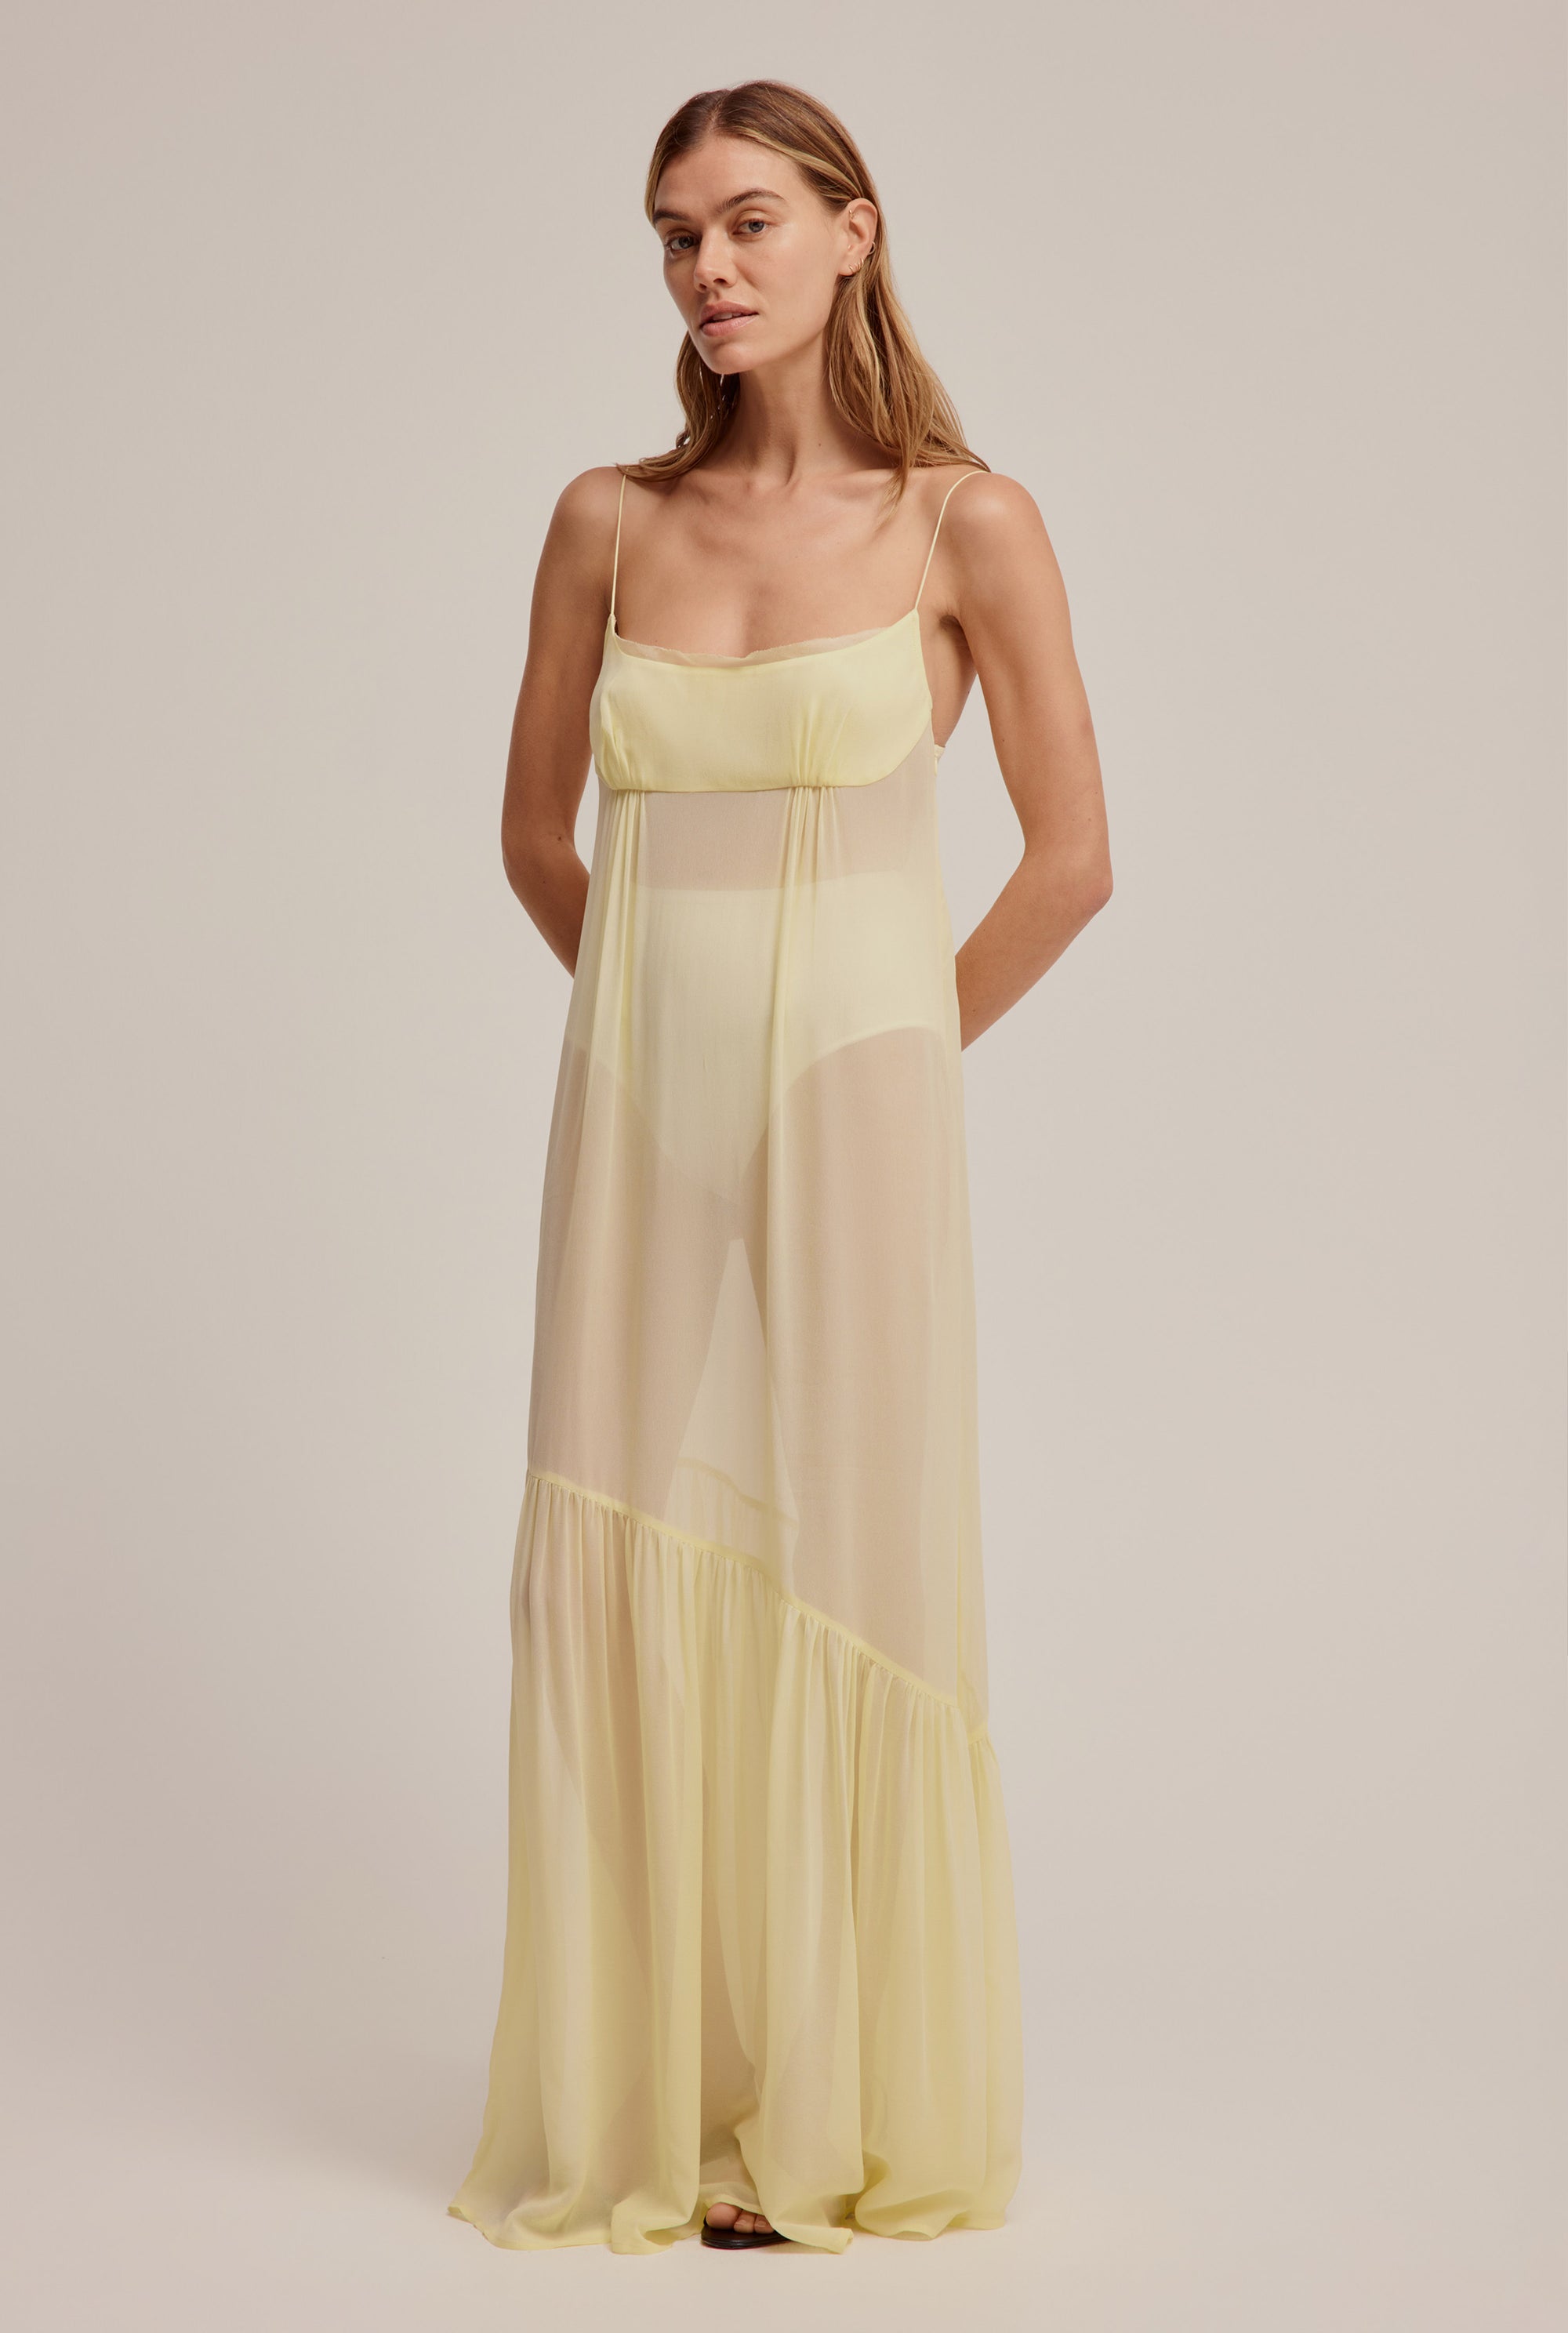 Sheer Panelled Bodice Dress - Dusty Yellow